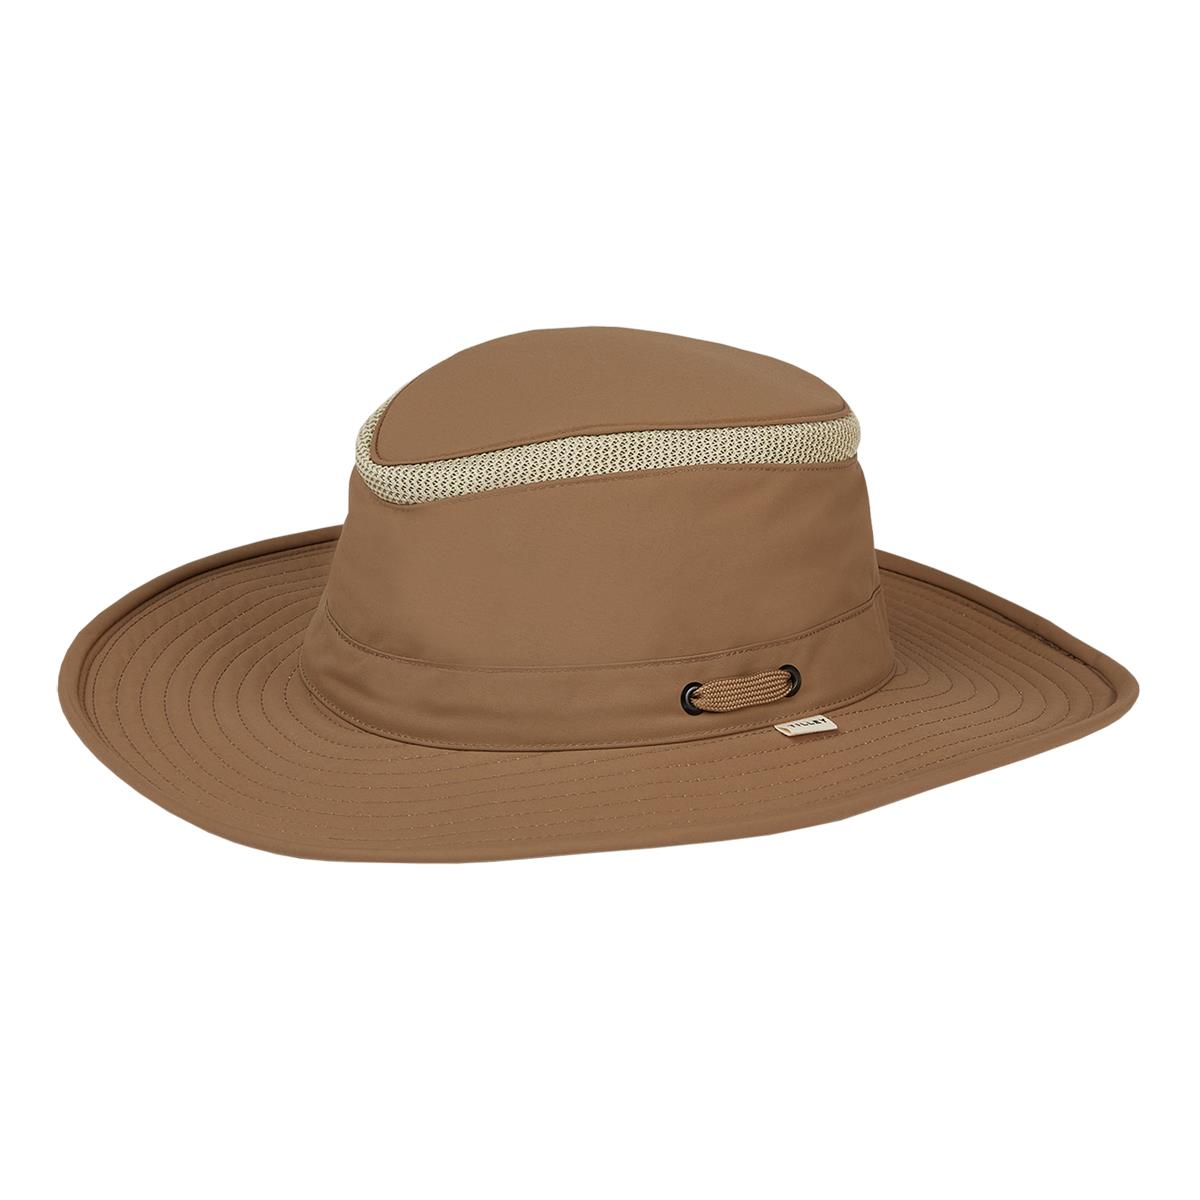 What if the Tilley Airflo Hat is lost at sea?